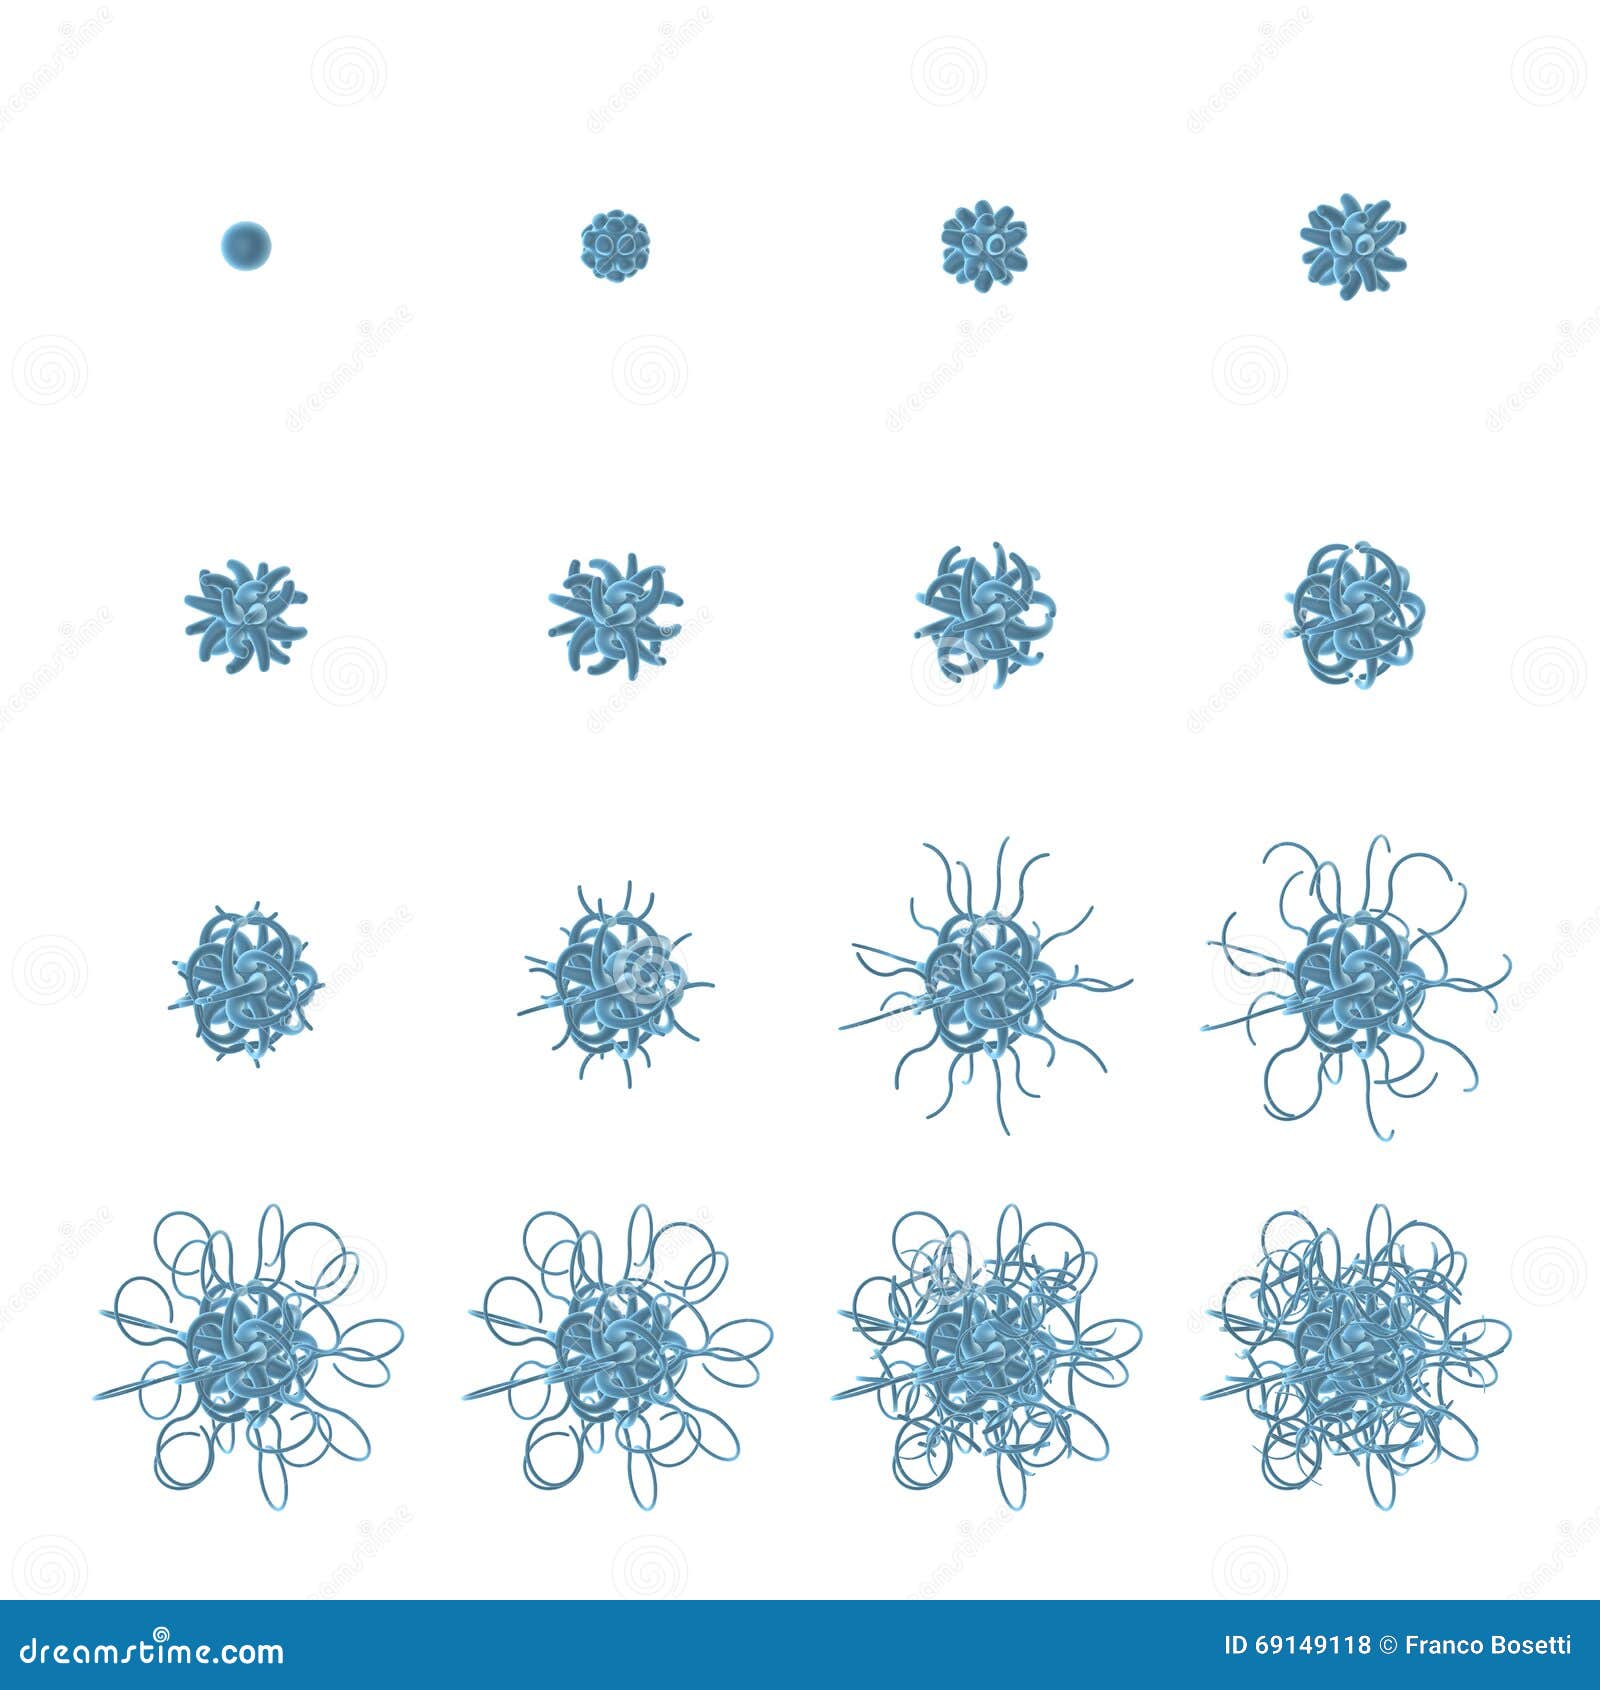 viruses or blue cell with filaments